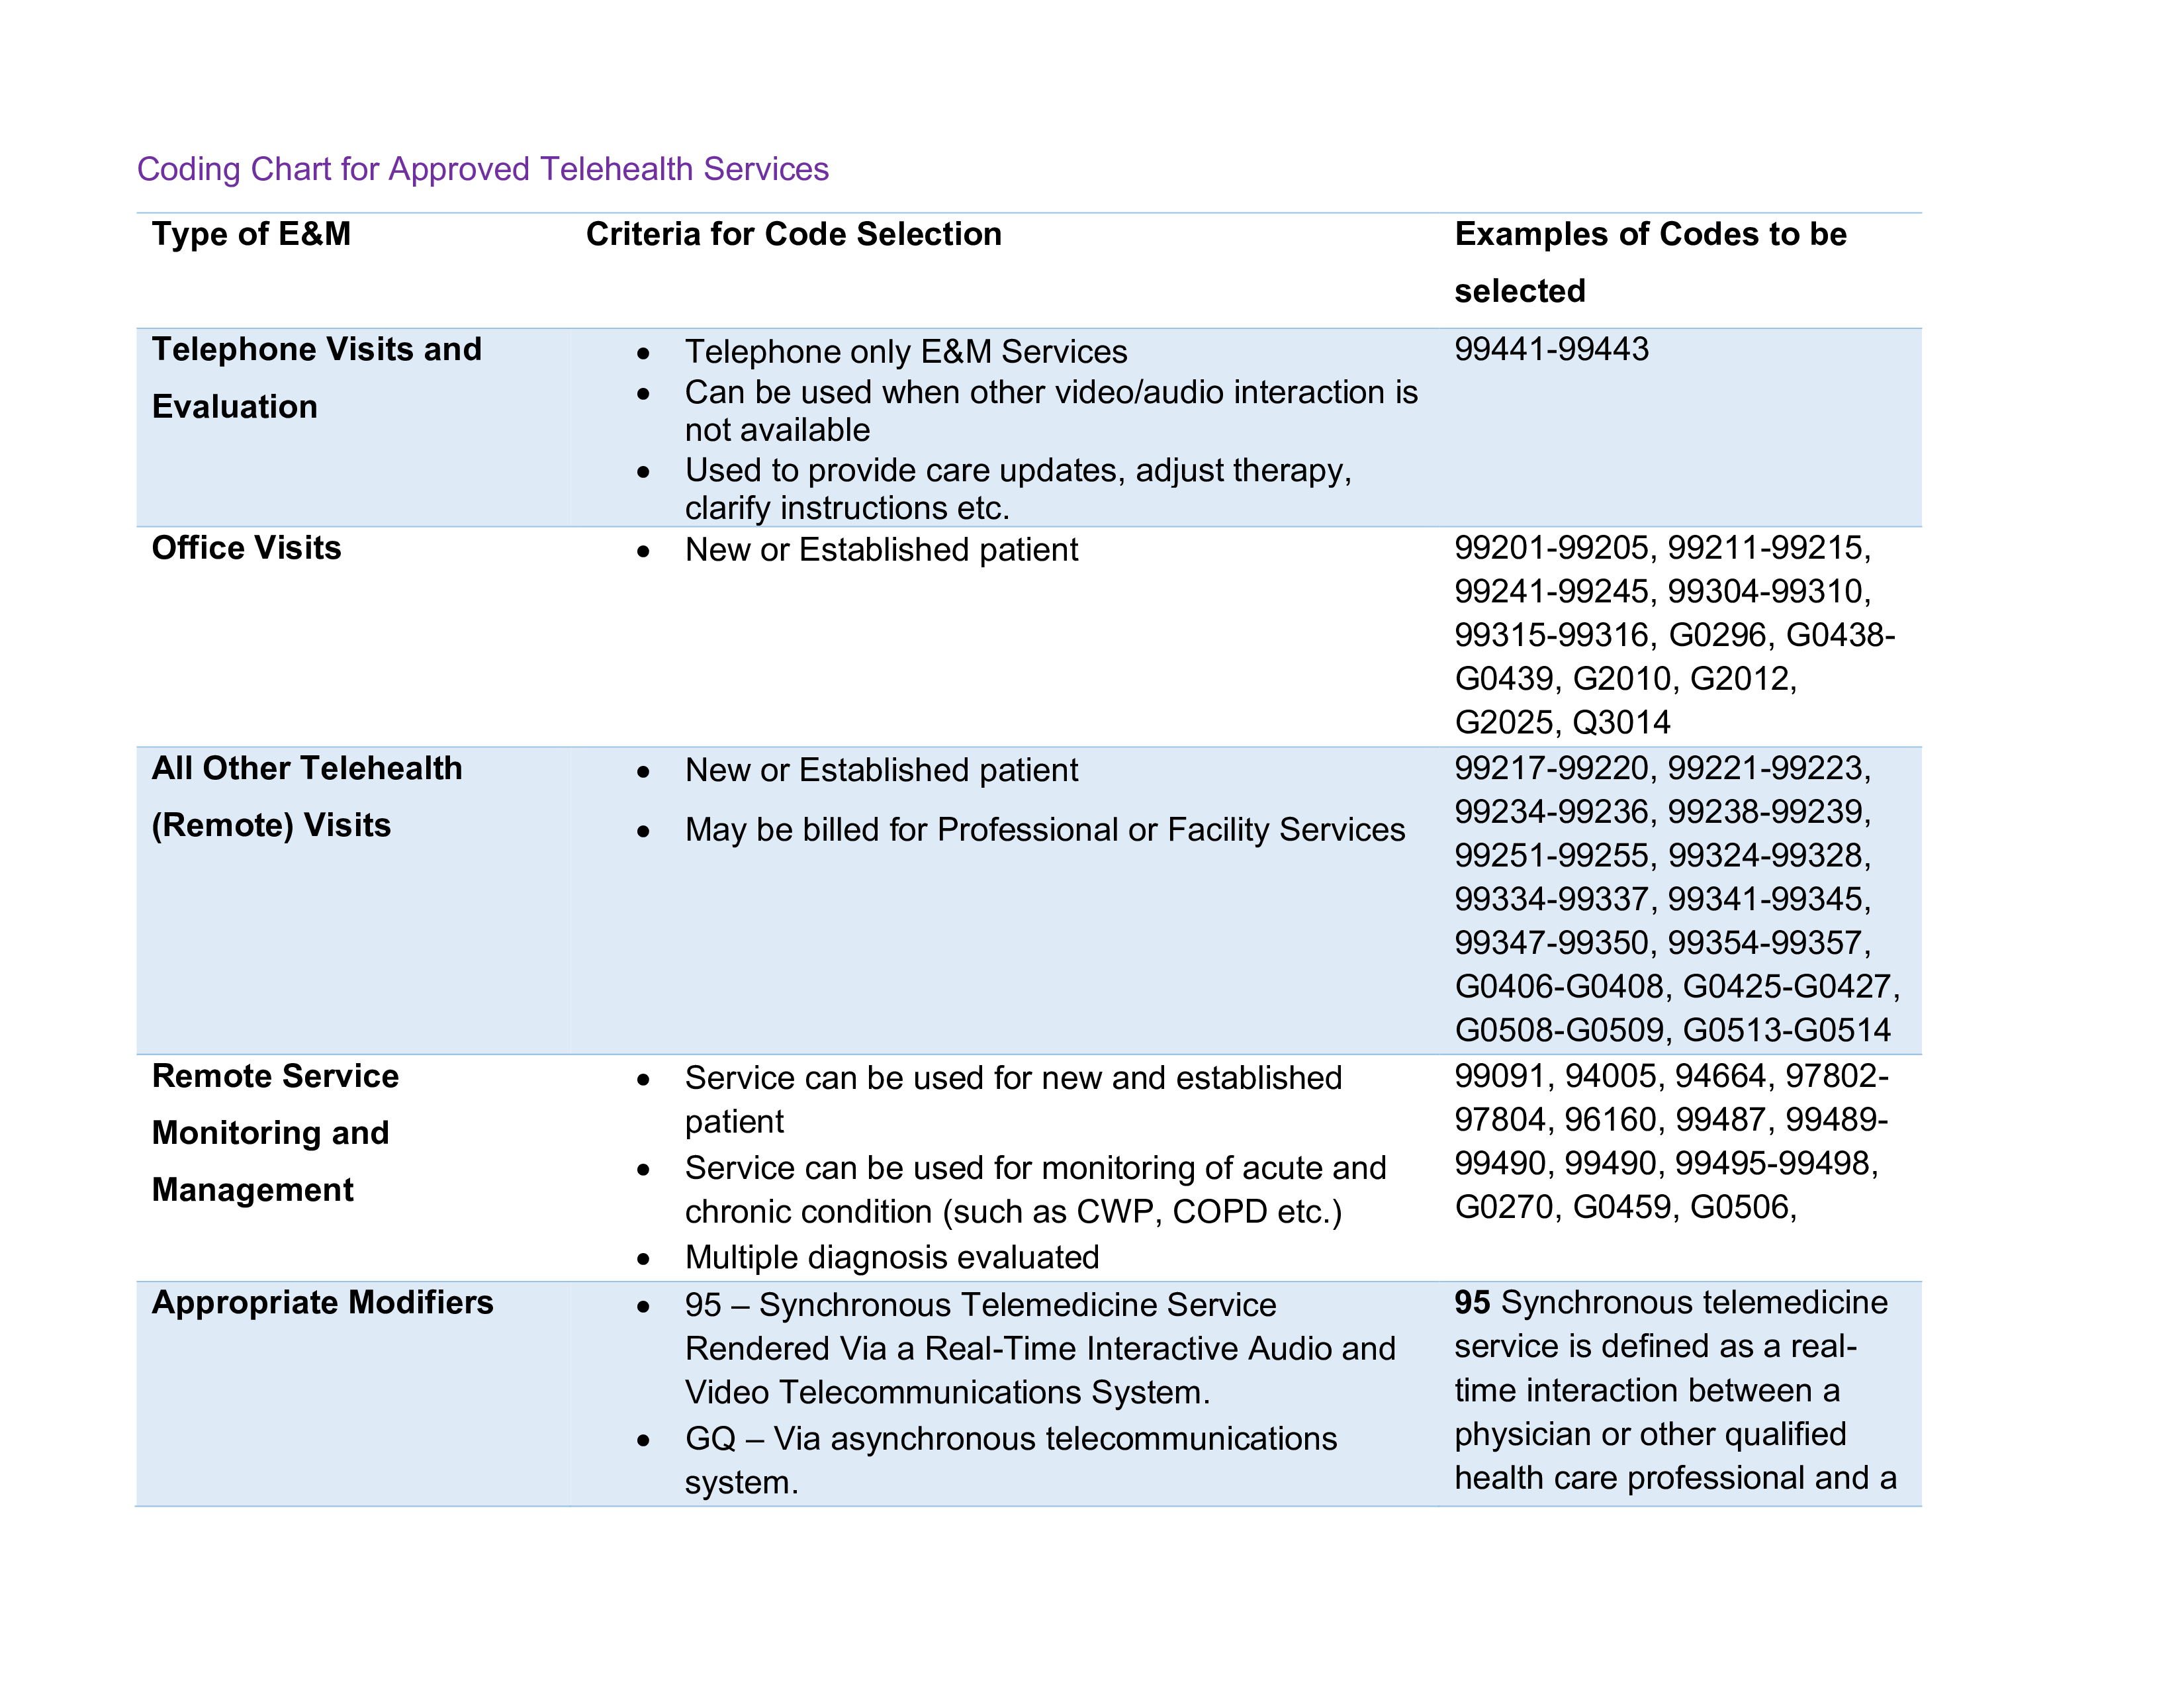 Coding Chart for Approved Telehealth Services part 1